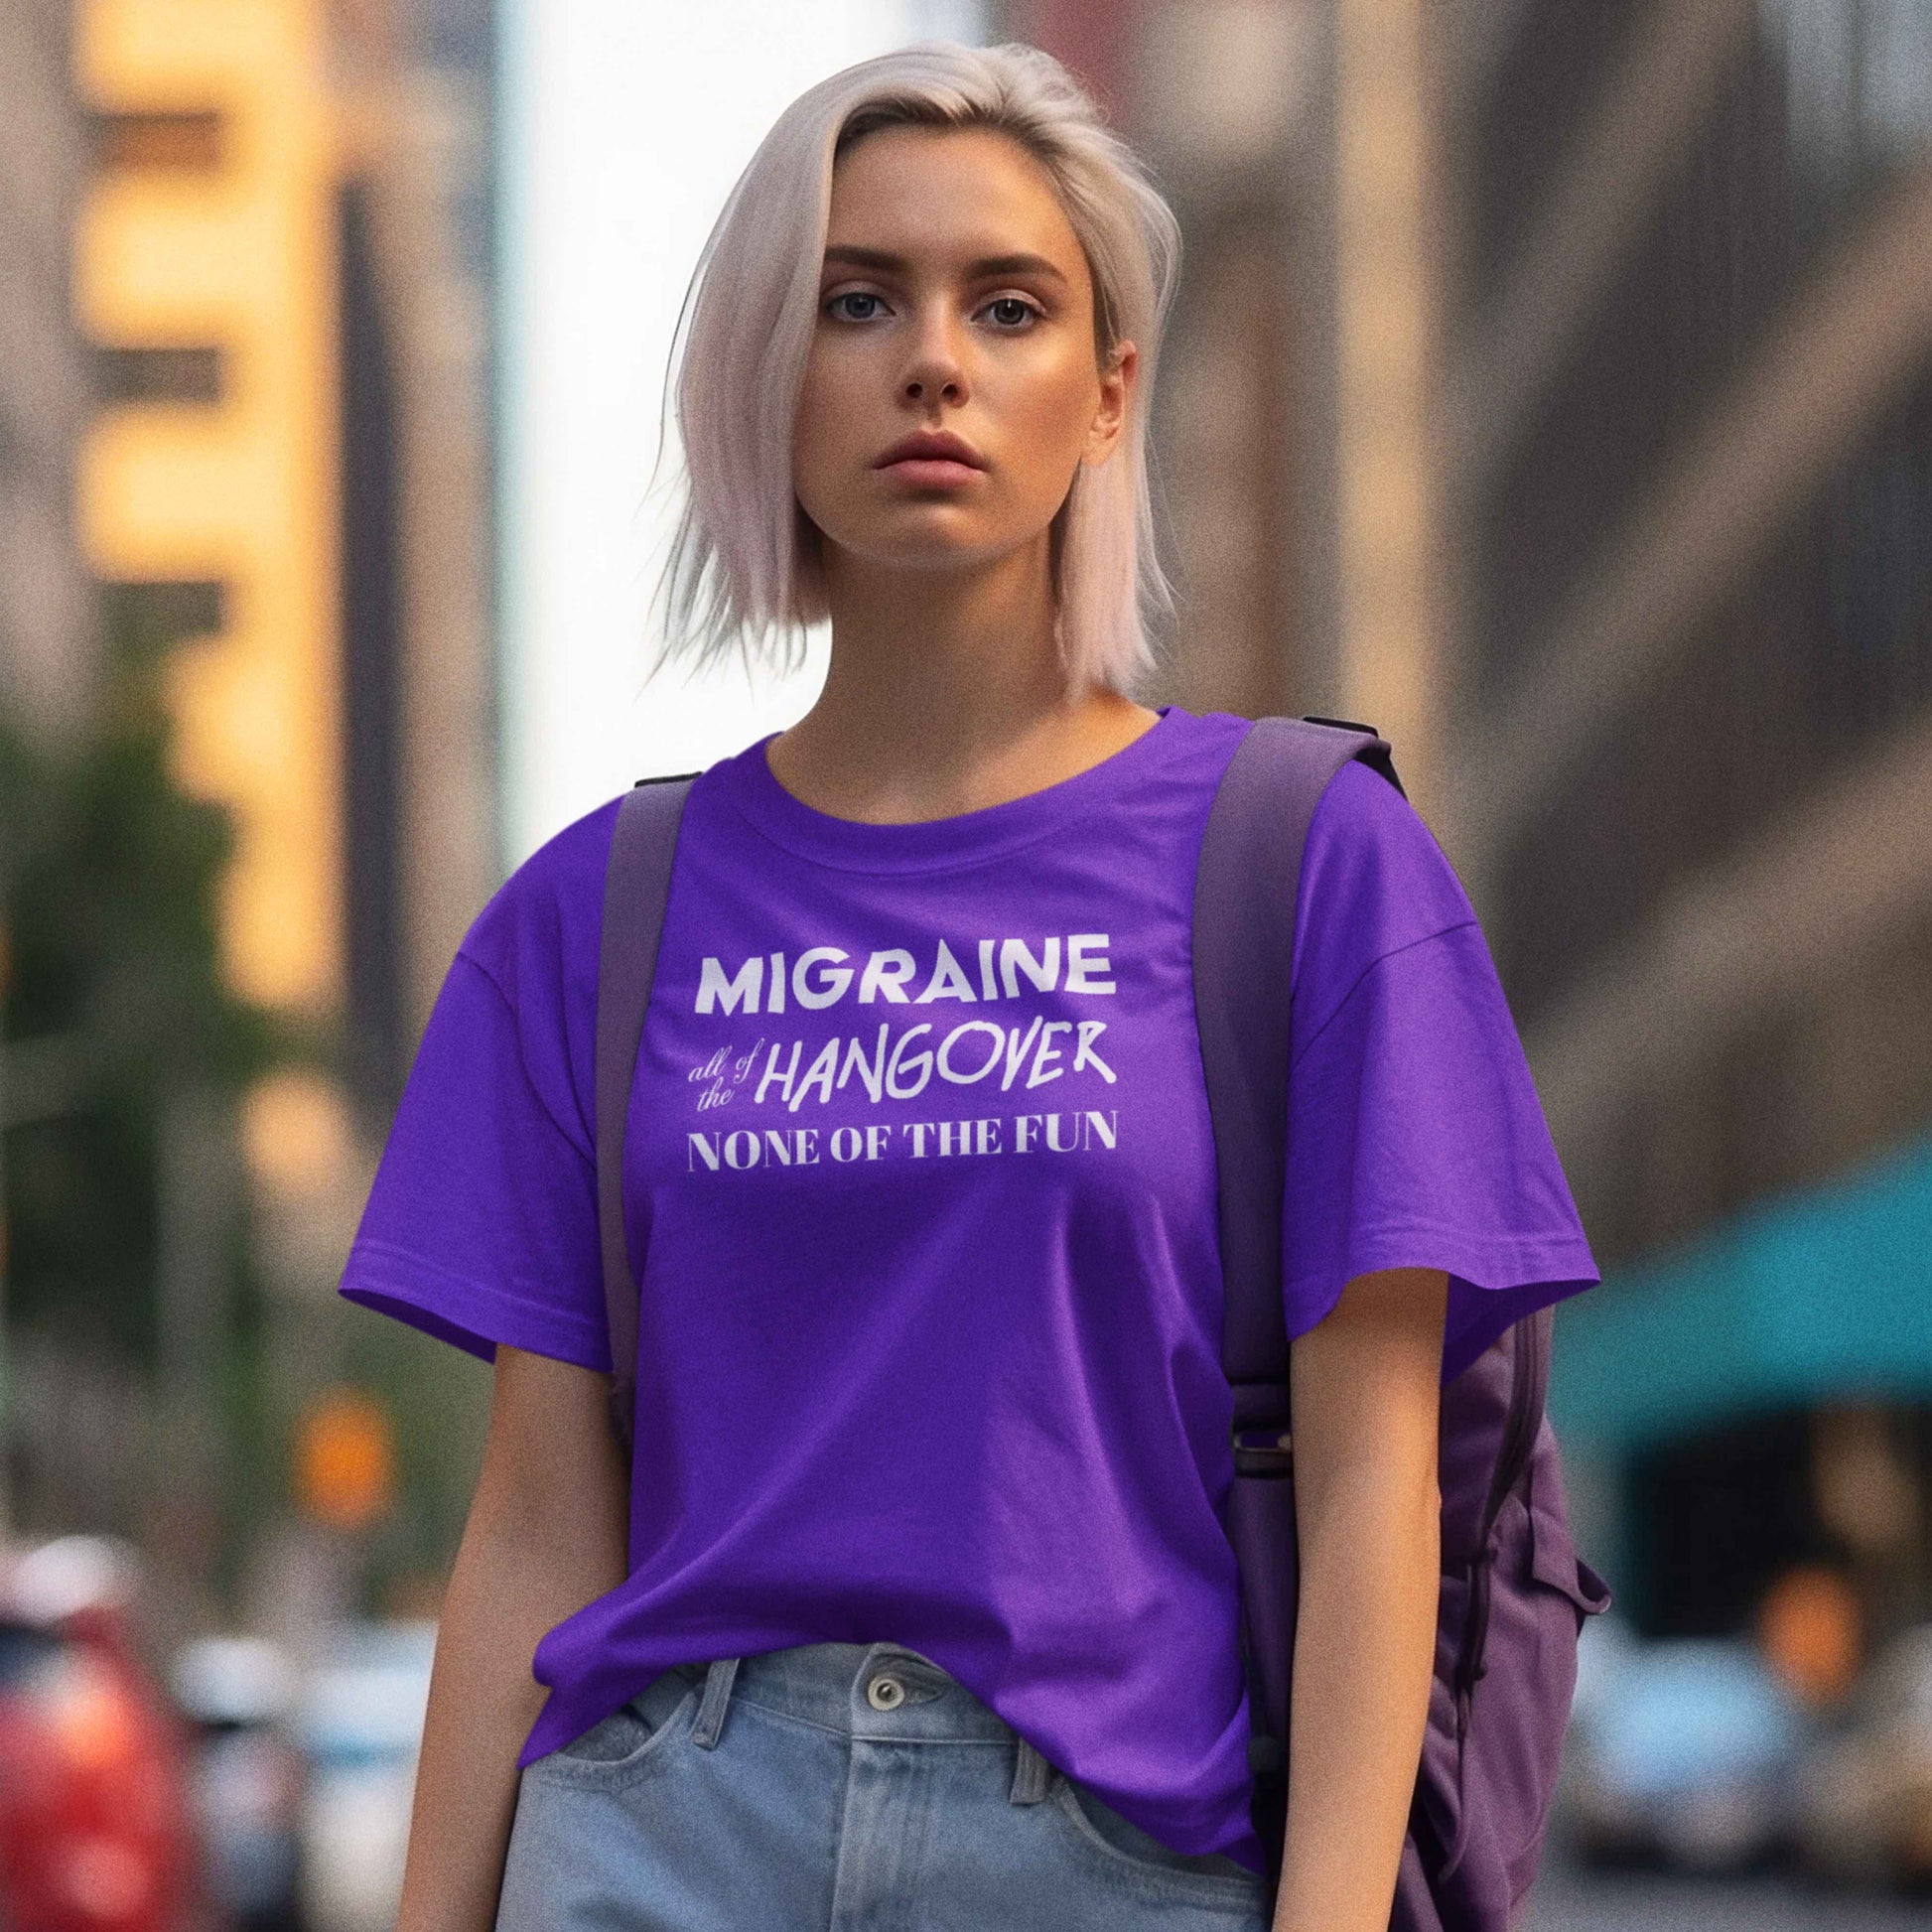 Woman with purple tshirt that says "Migraine all of the Hangover None of the Fun"